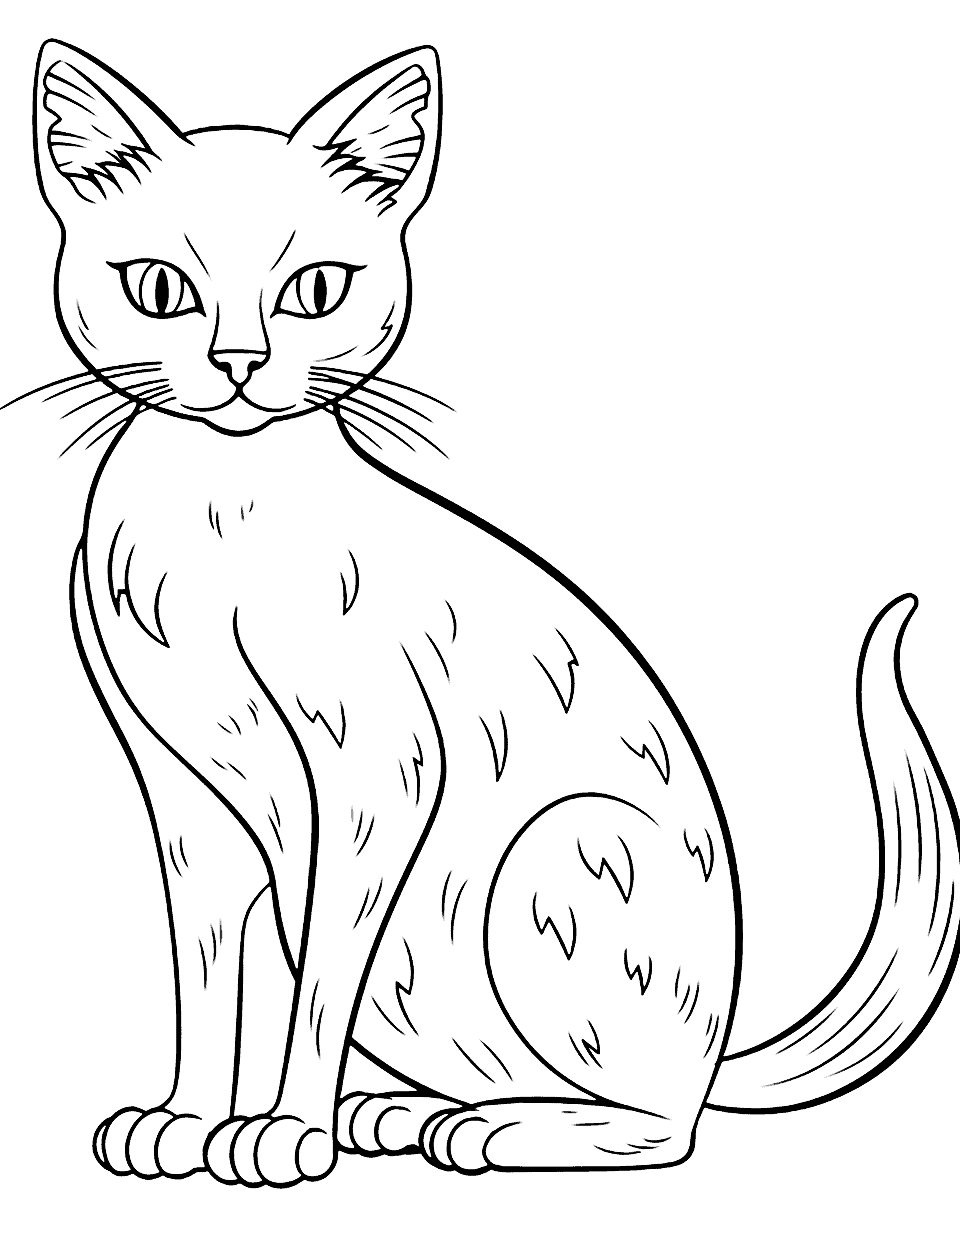 Detailed Siamese Cat Coloring Page - A highly detailed image of a Siamese cat with its distinctive color points.